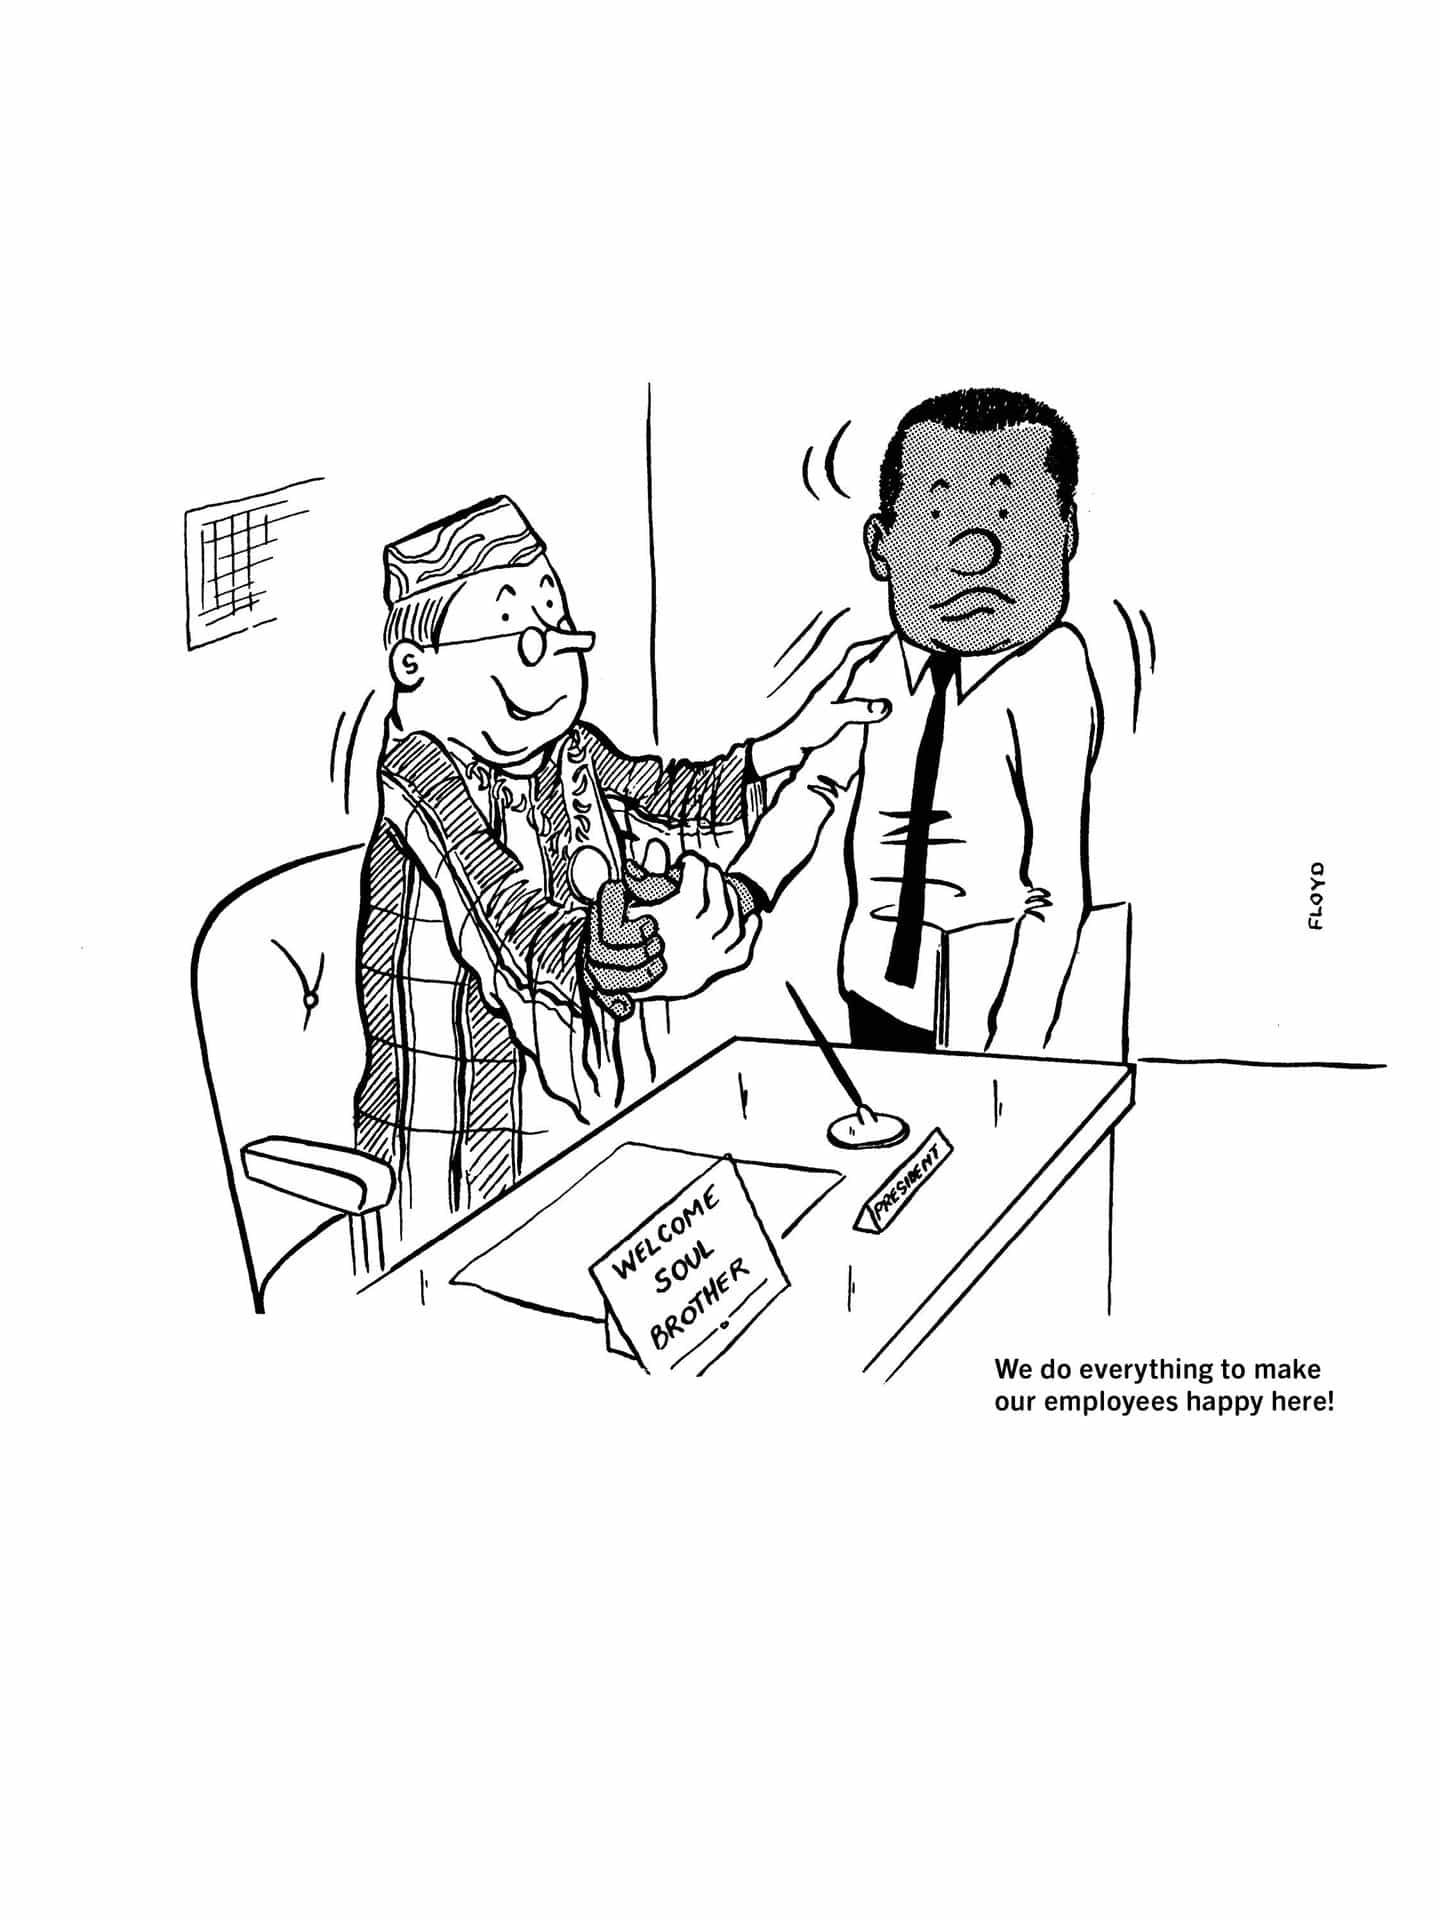 It's Life As I See It: Tom Floyd, Integration Is a Bitch!, 1969, Opinion News Syndicate, Inc. (Copyright © Tom Floyd, 1969)